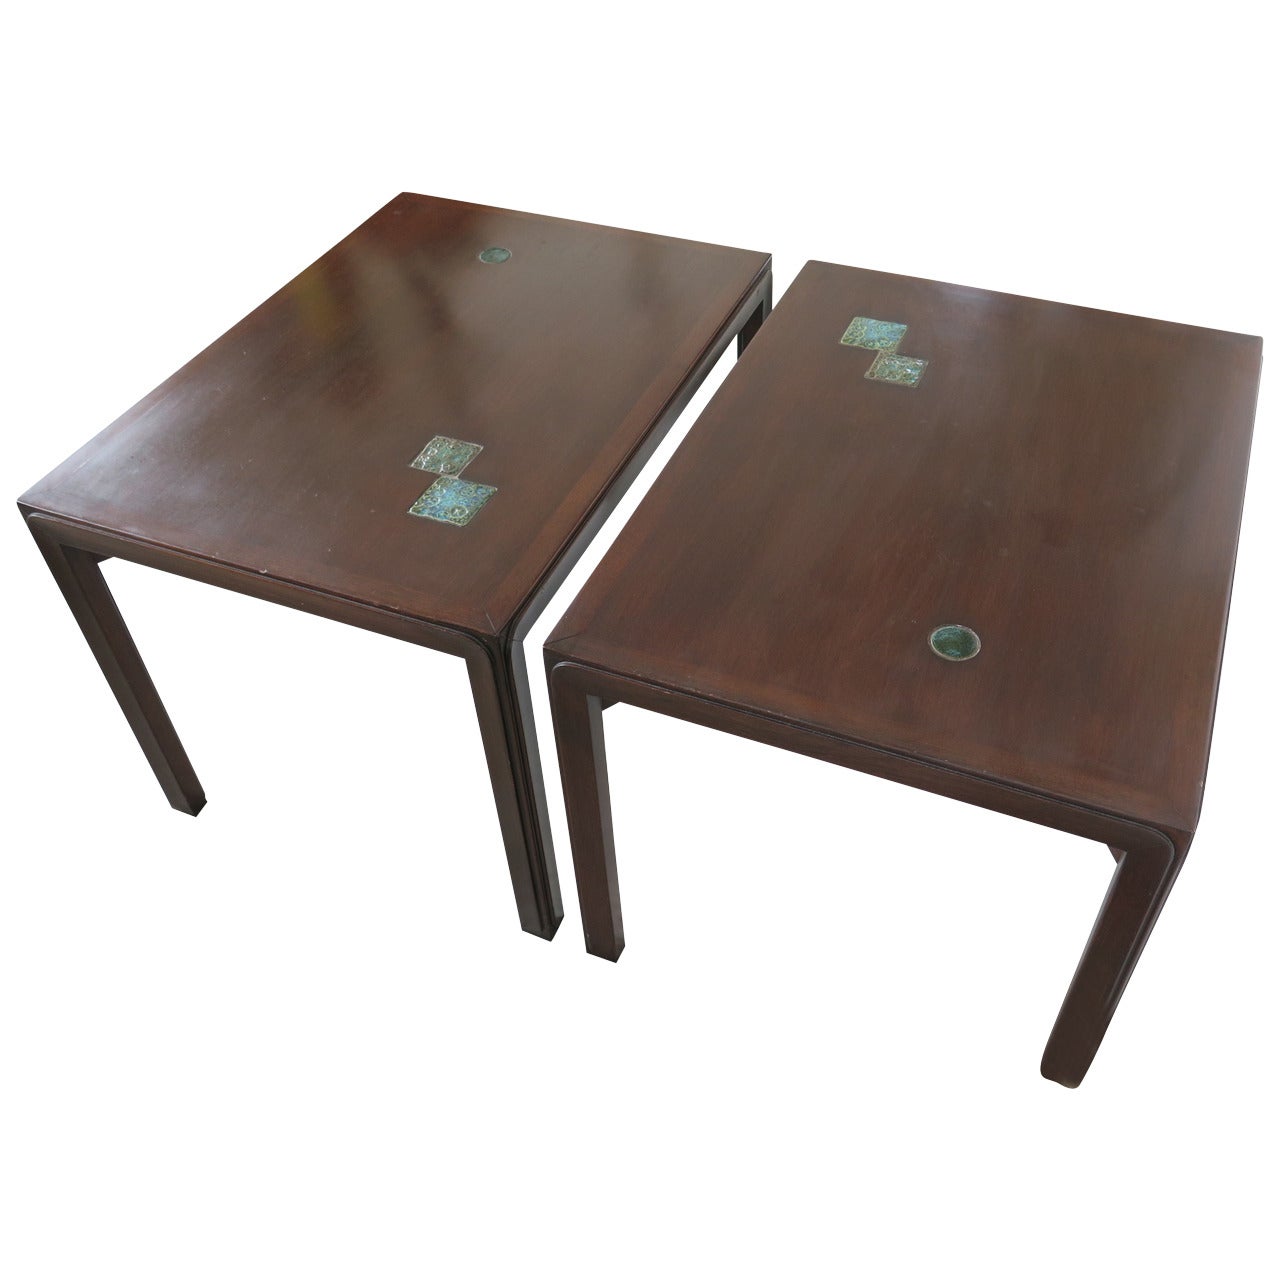 Pair of Edward Wormley for Dunbar Occasional Tables with Natzler Tiles